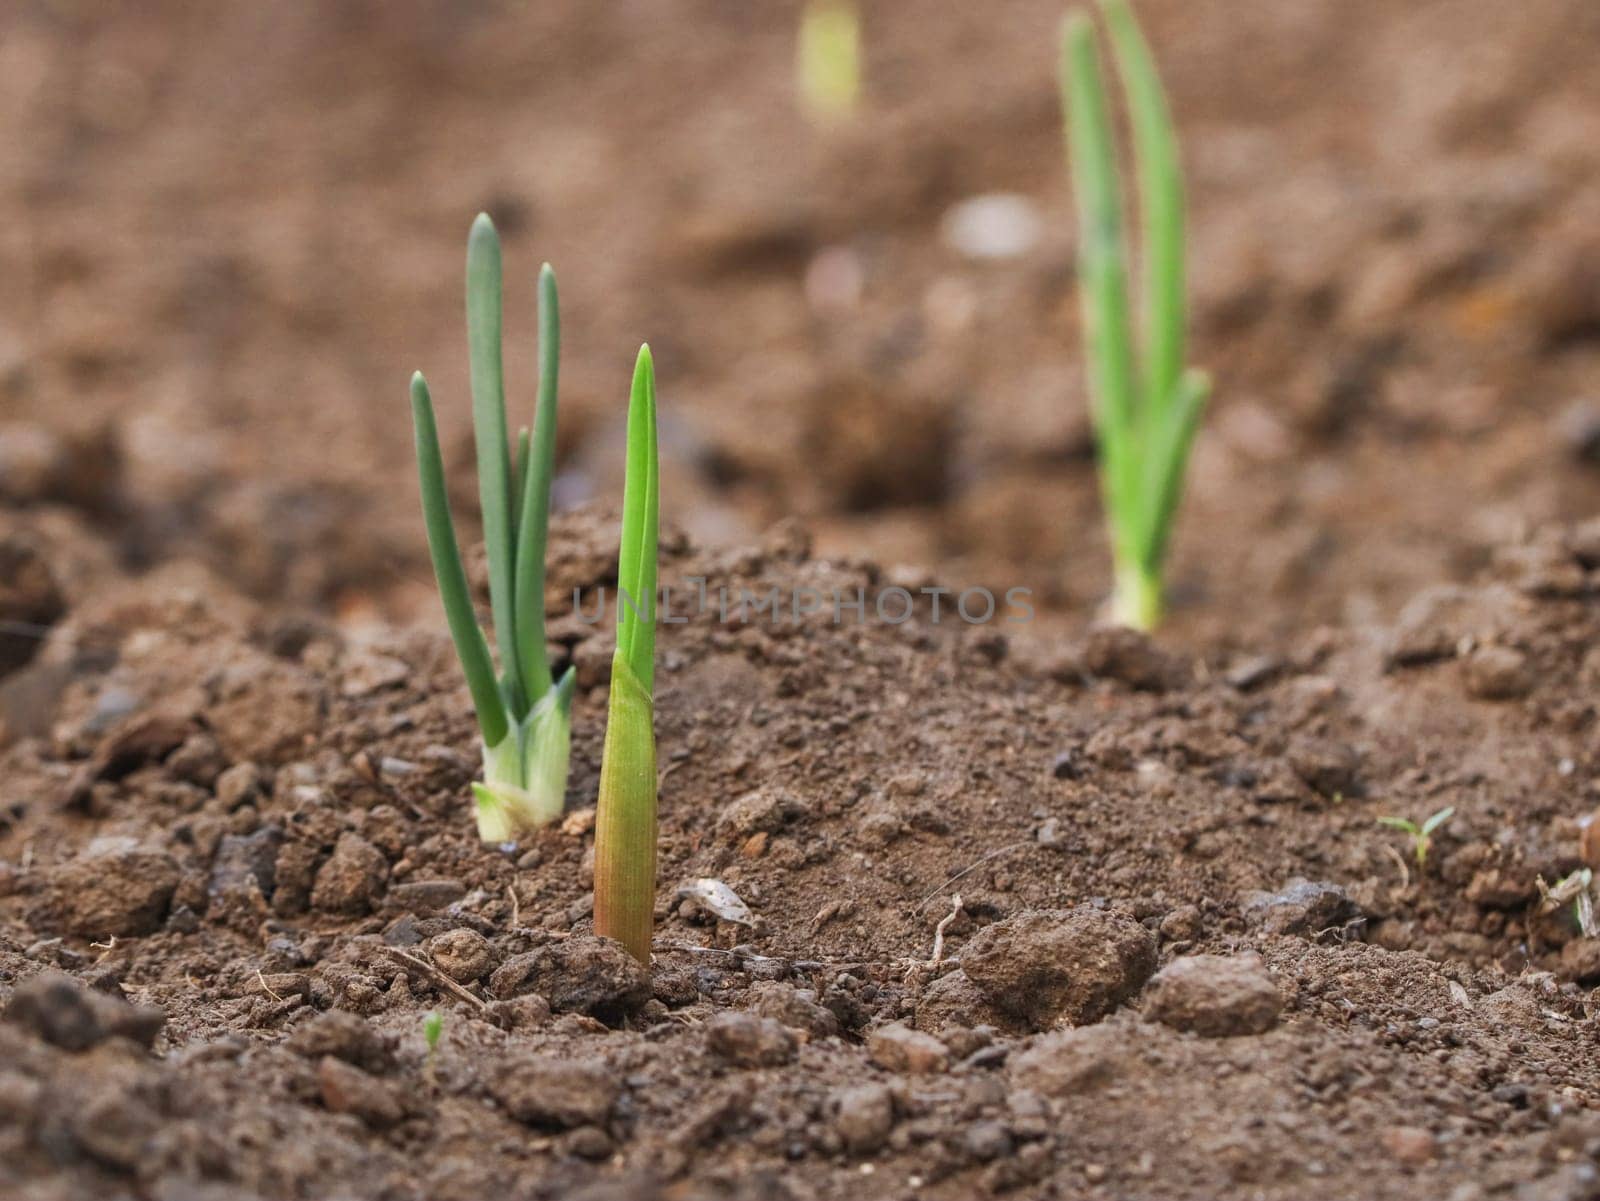 Beautiful view of three young onion sprouts in black soil, close-up side view with depth of field.